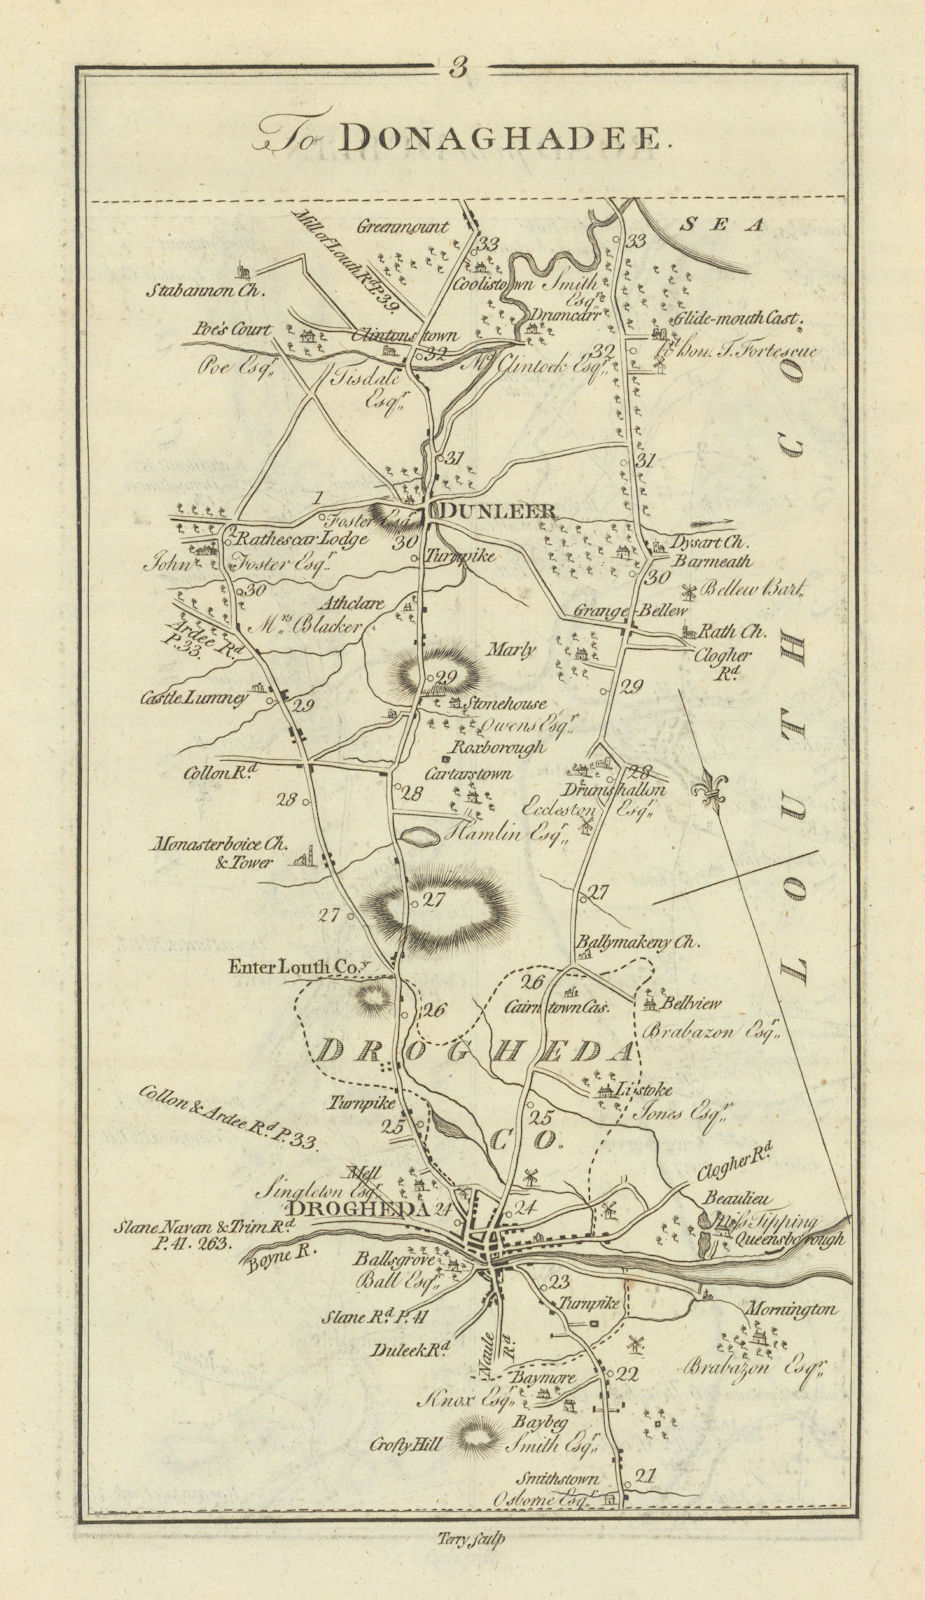 Associate Product #3 Road from Dublin to Donaghadee Drogheda Dunleer Louth TAYLOR/SKINNER 1778 map